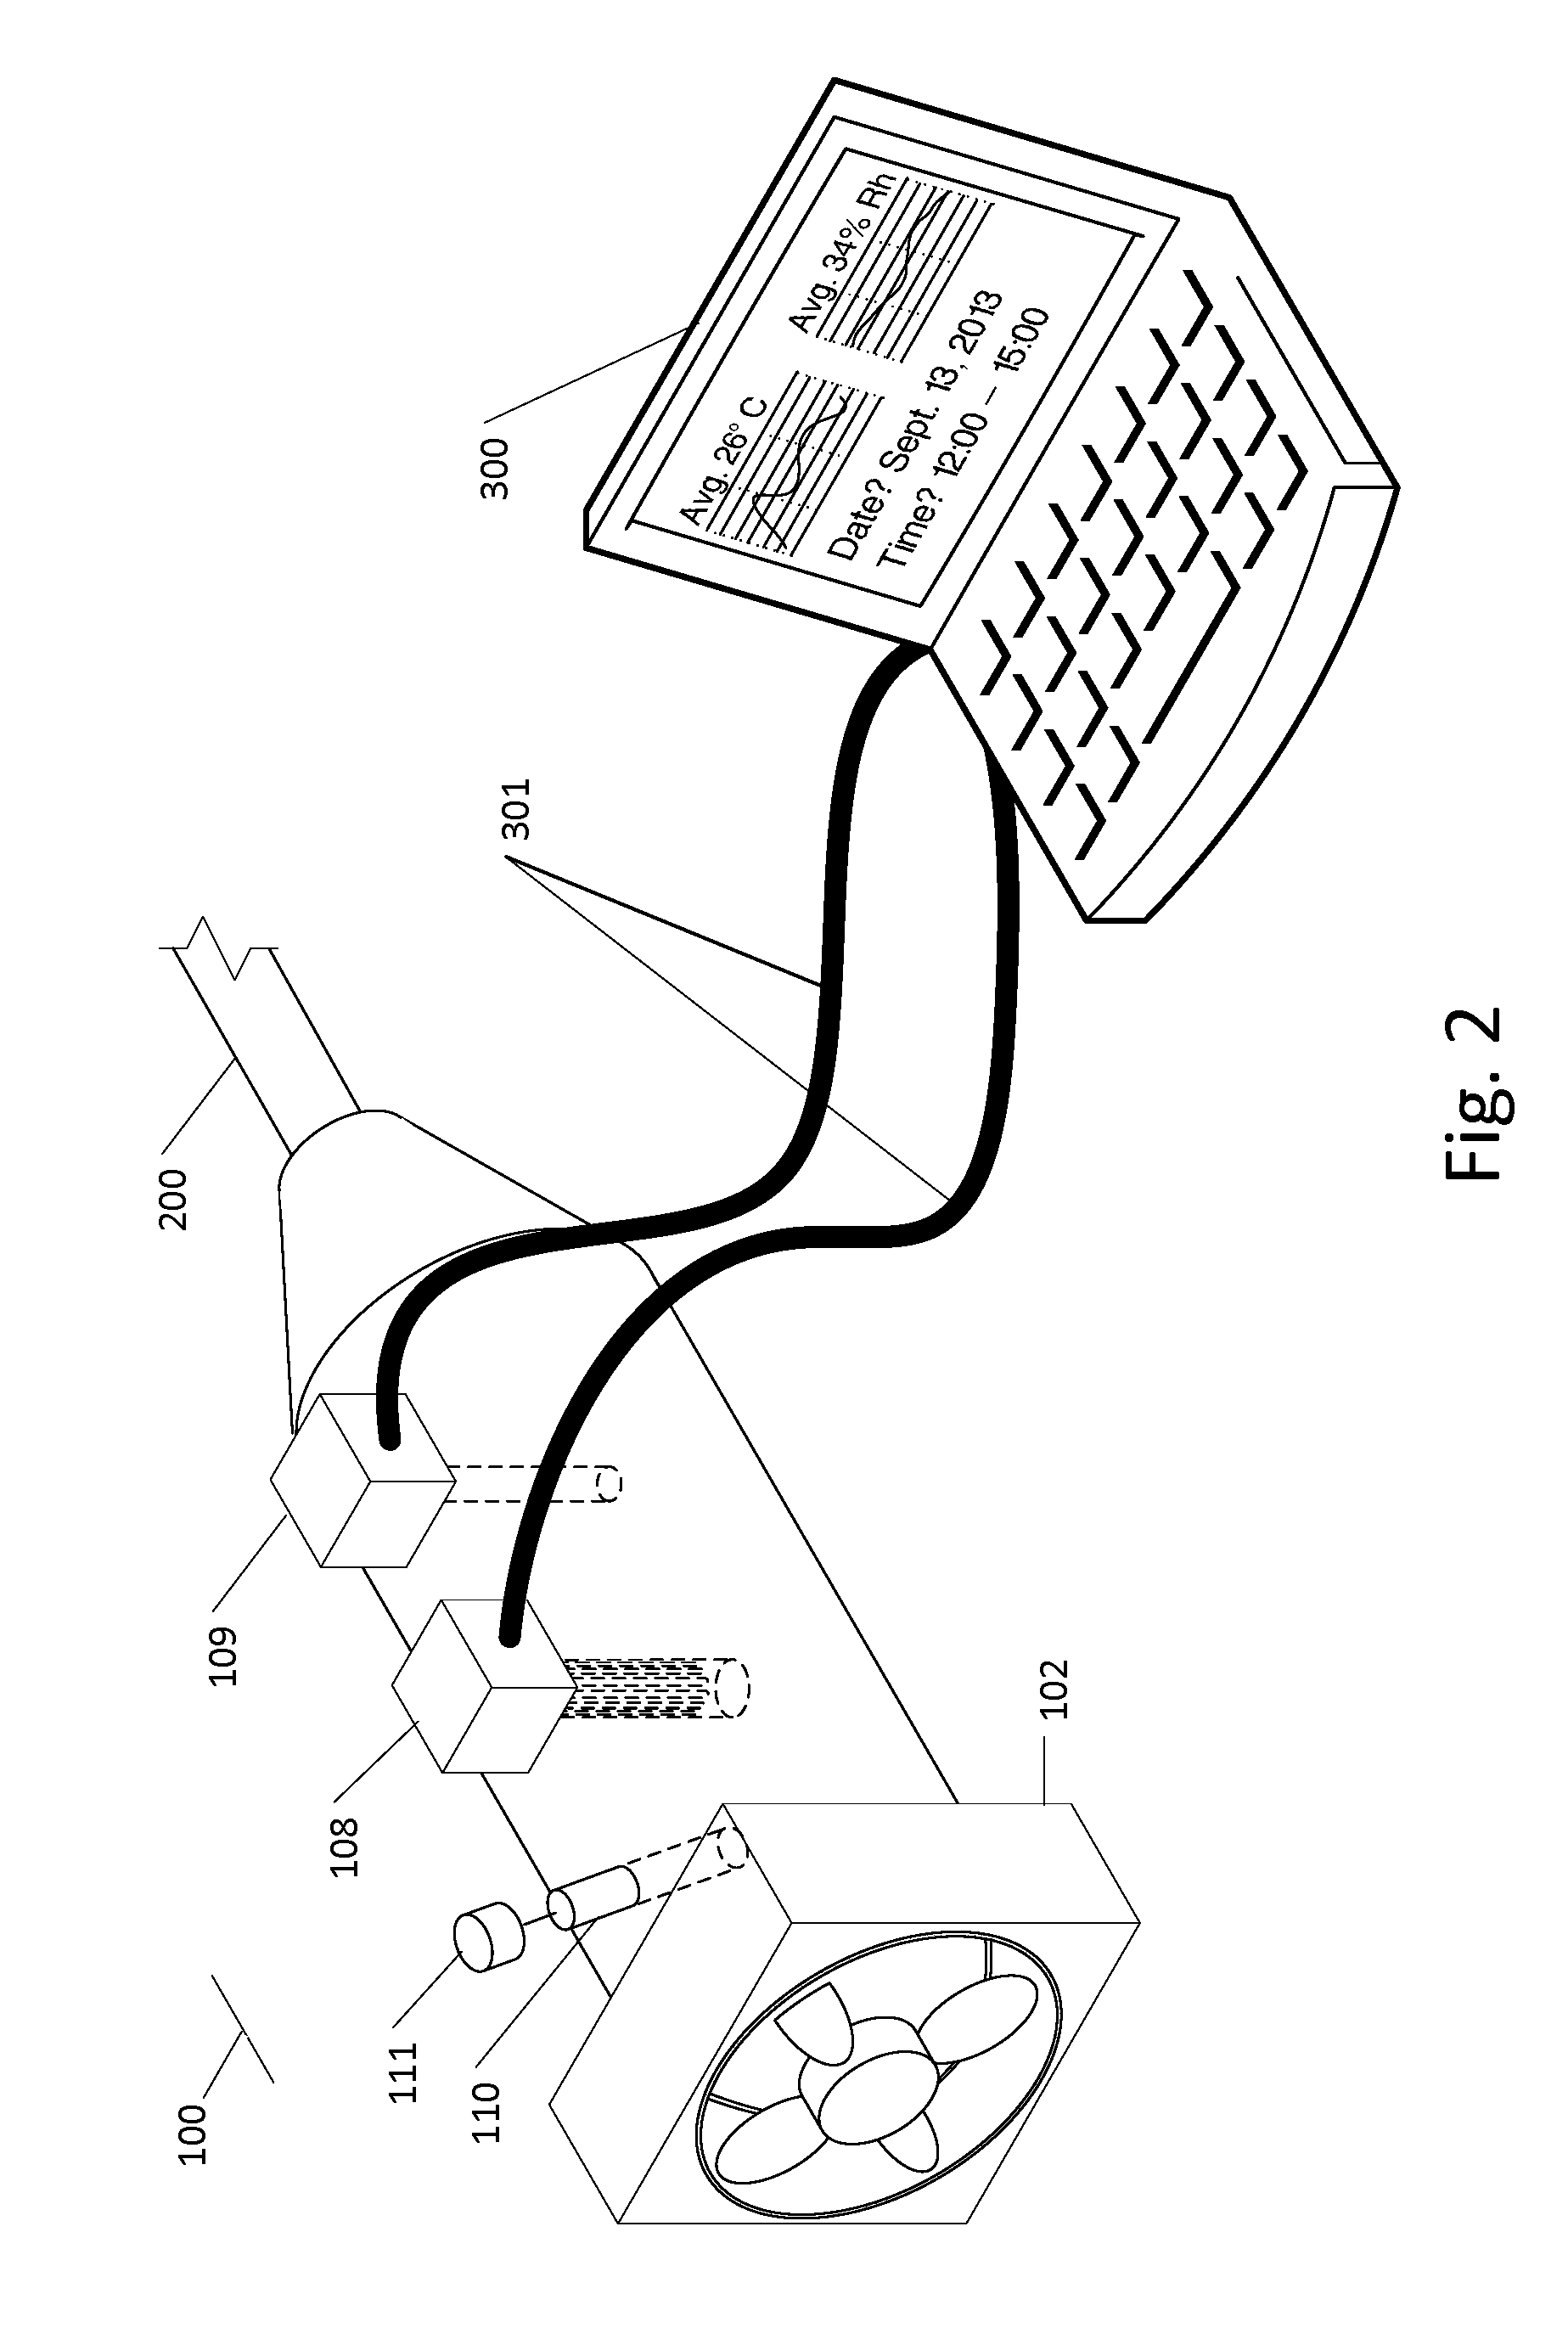 Pumped Air Relative Humidity and Temperature Sensing System with Optional Gas Assay Functionality